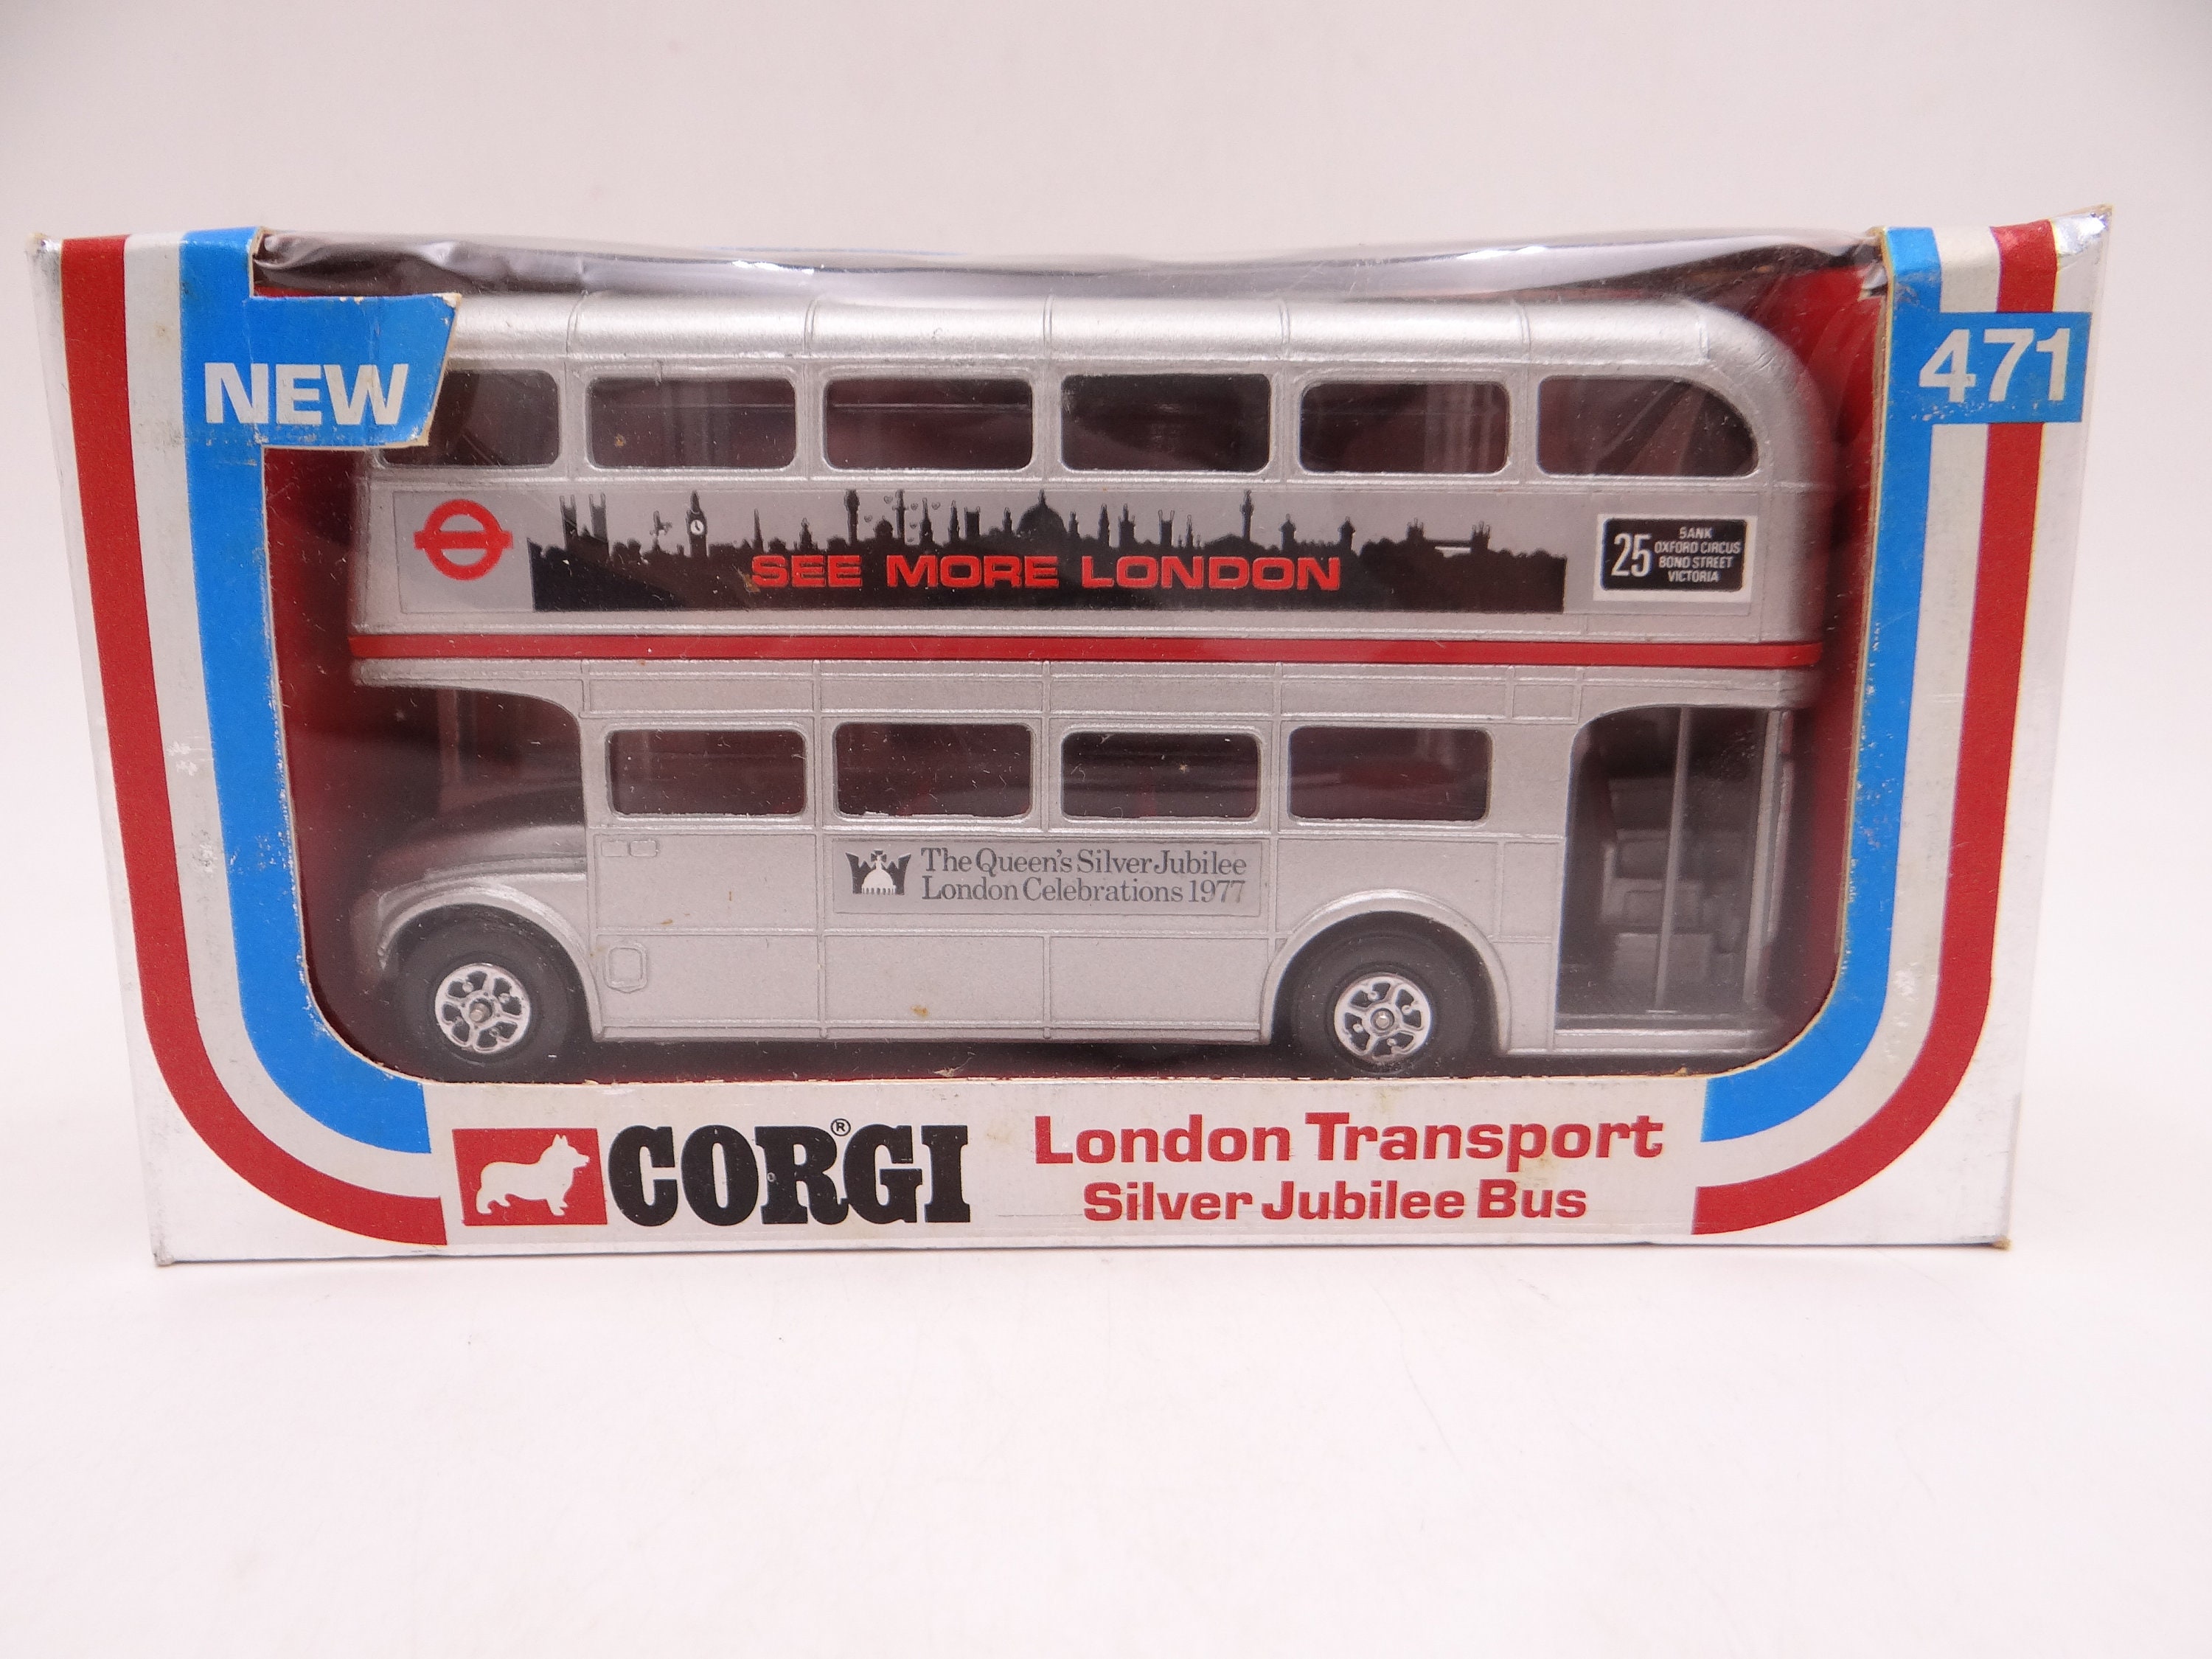 Taxi Telephone Box and Post Box London Souvenir Collectable Die Cast 8-9cm length Model Set Containing Bus 